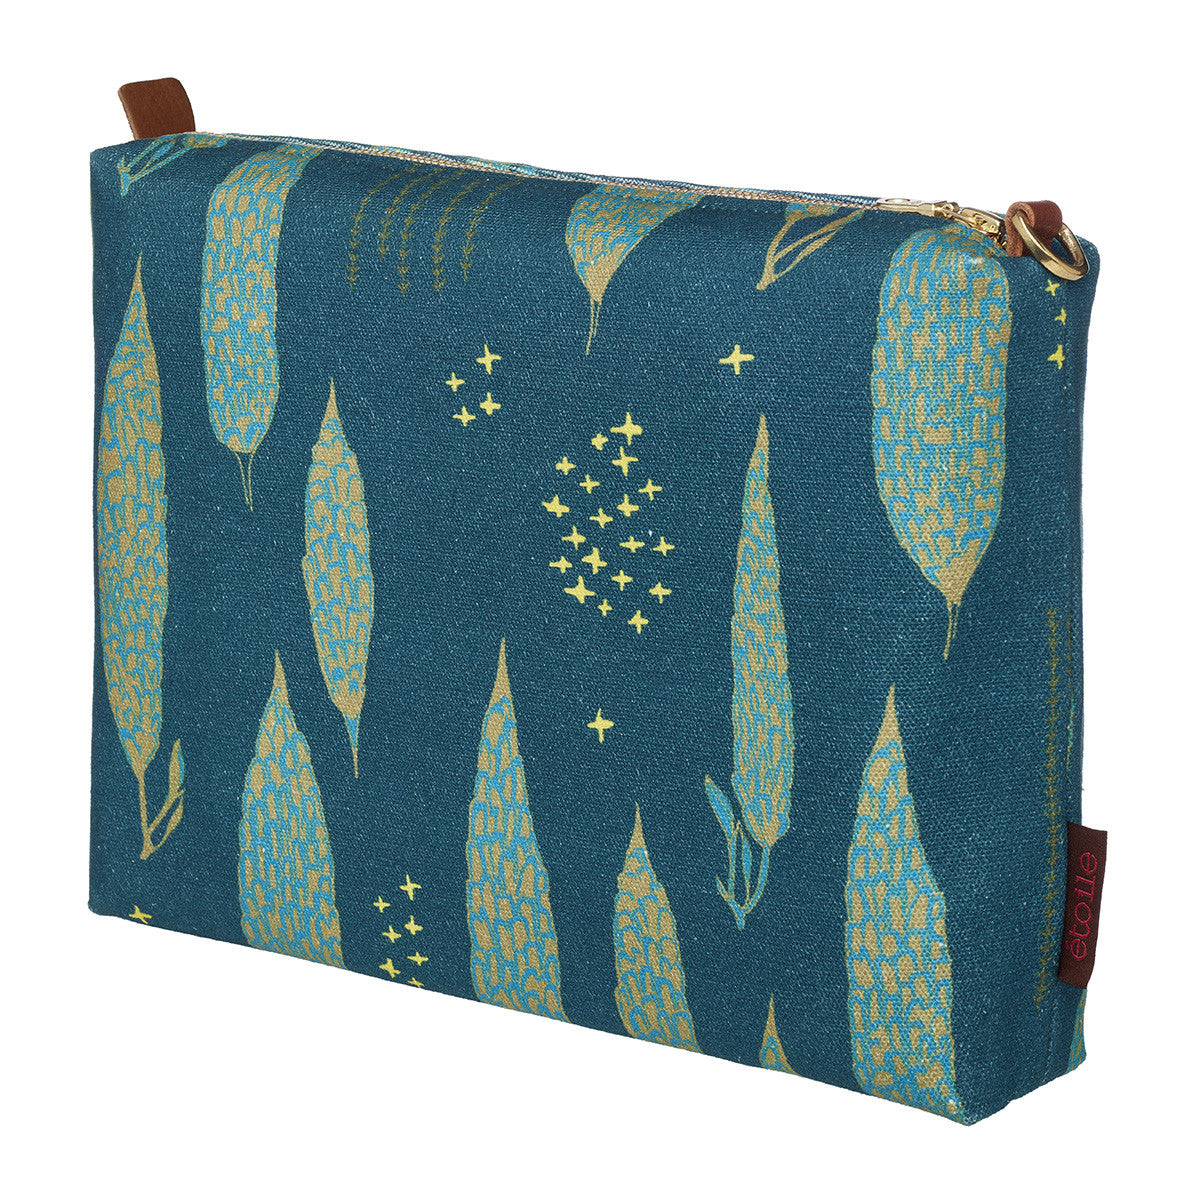 Graphic Tree Pattern Cotton Canvas Vanity Travel Bag in Dark Petrol Blue, Turquoise & Antique Moss Green Perfect for all your beauty and cosmetic needs while travelling or at home Ships from Canada (USA)